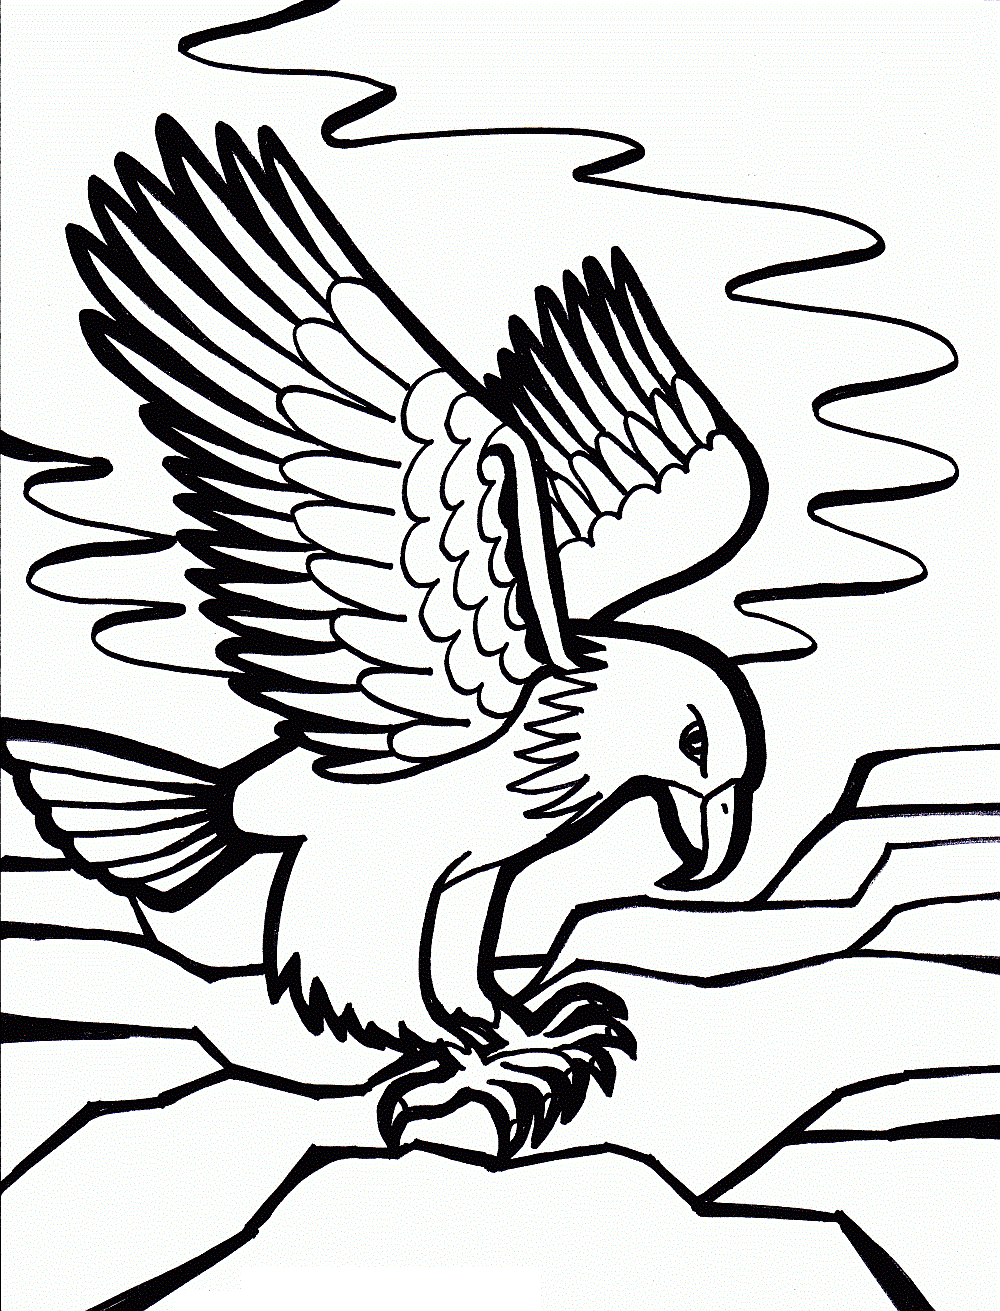 Free printable bald eagle coloring pages for kids bird coloring pages animal coloring pages coloring pages for kids